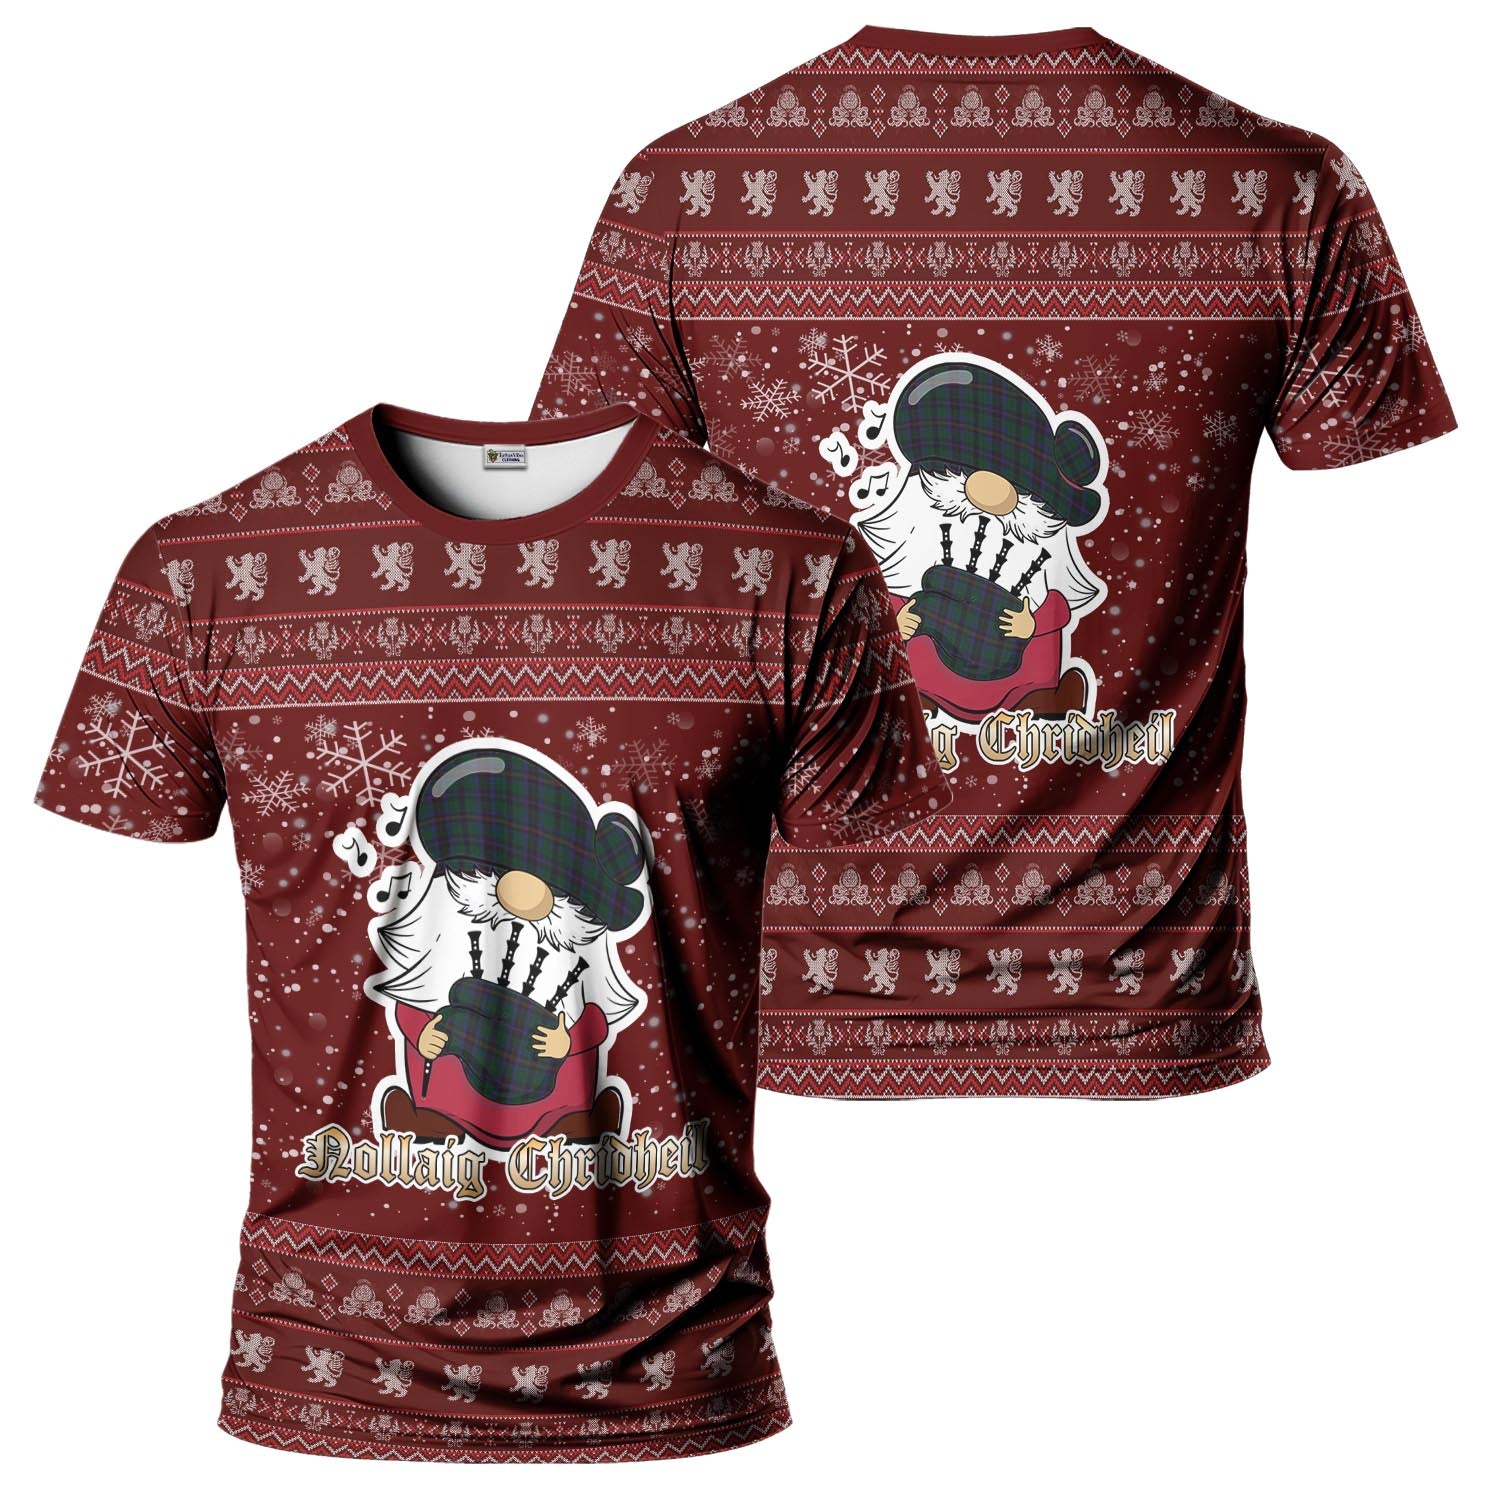 Phillips of Wales Clan Christmas Family T-Shirt with Funny Gnome Playing Bagpipes - Tartanvibesclothing